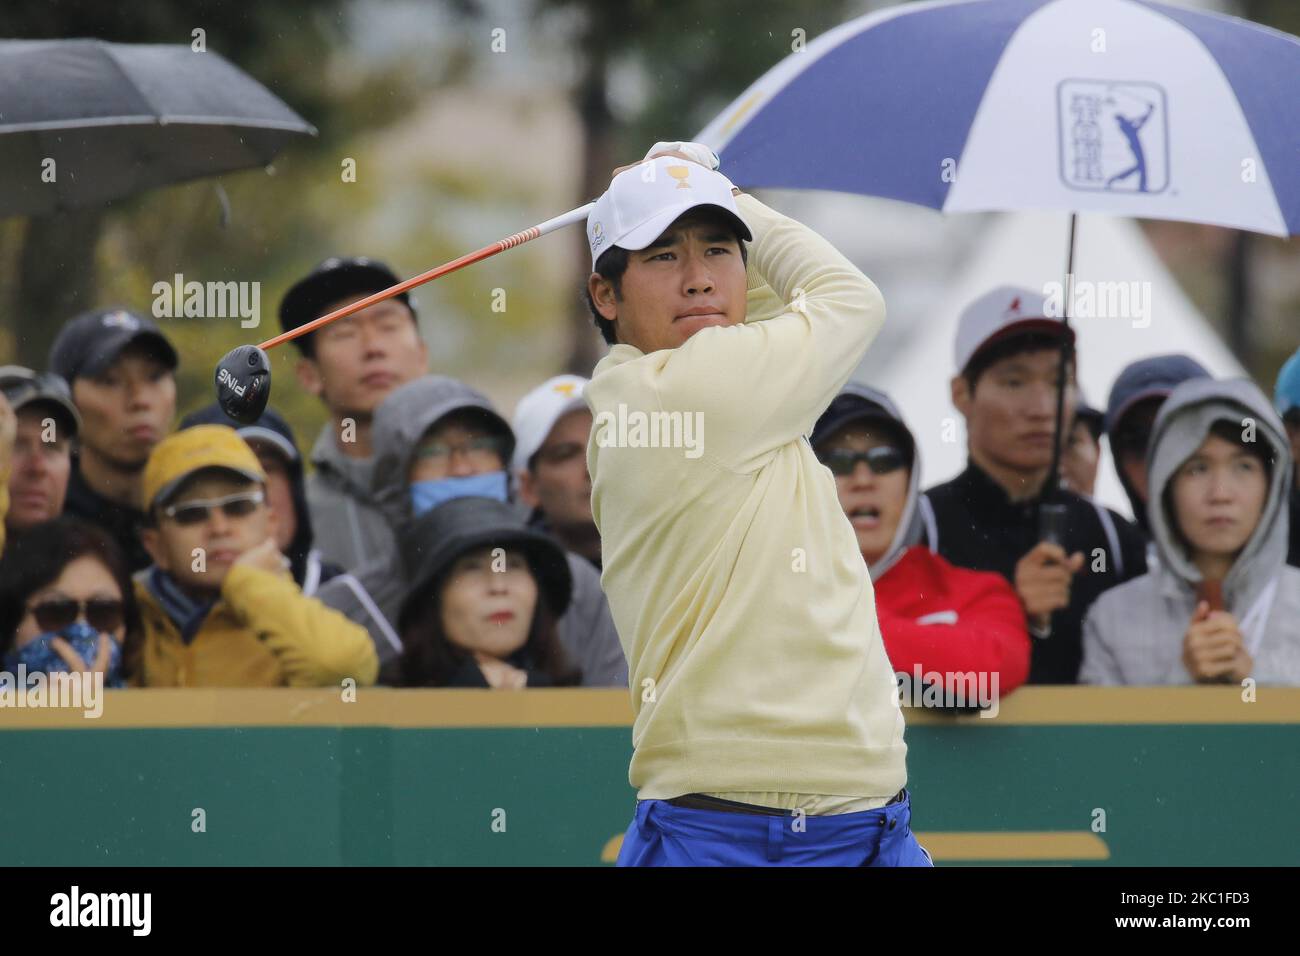 International Team Player Hideki Matsuyama action on the 4th tee during the PGA Tour President Cup Single Match at Jack Nicklaus GC in Incheon, South Korea on October 11, 2015. (Photo by Seung-il Ryu/NurPhoto) Stock Photo